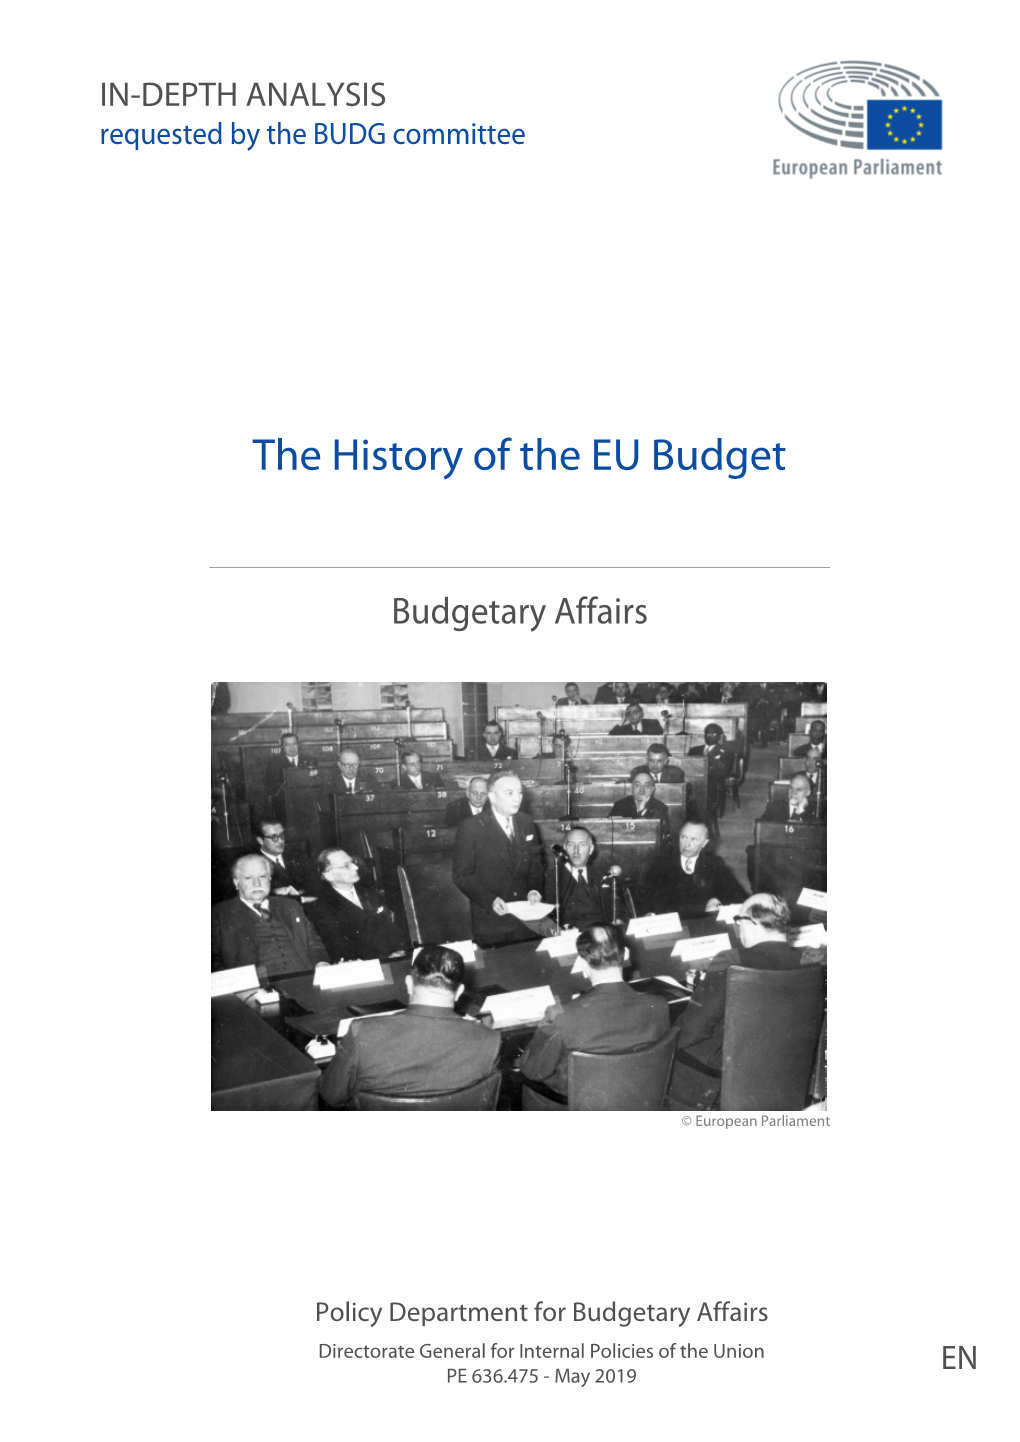 Briefing on the History of the EU Budget ______